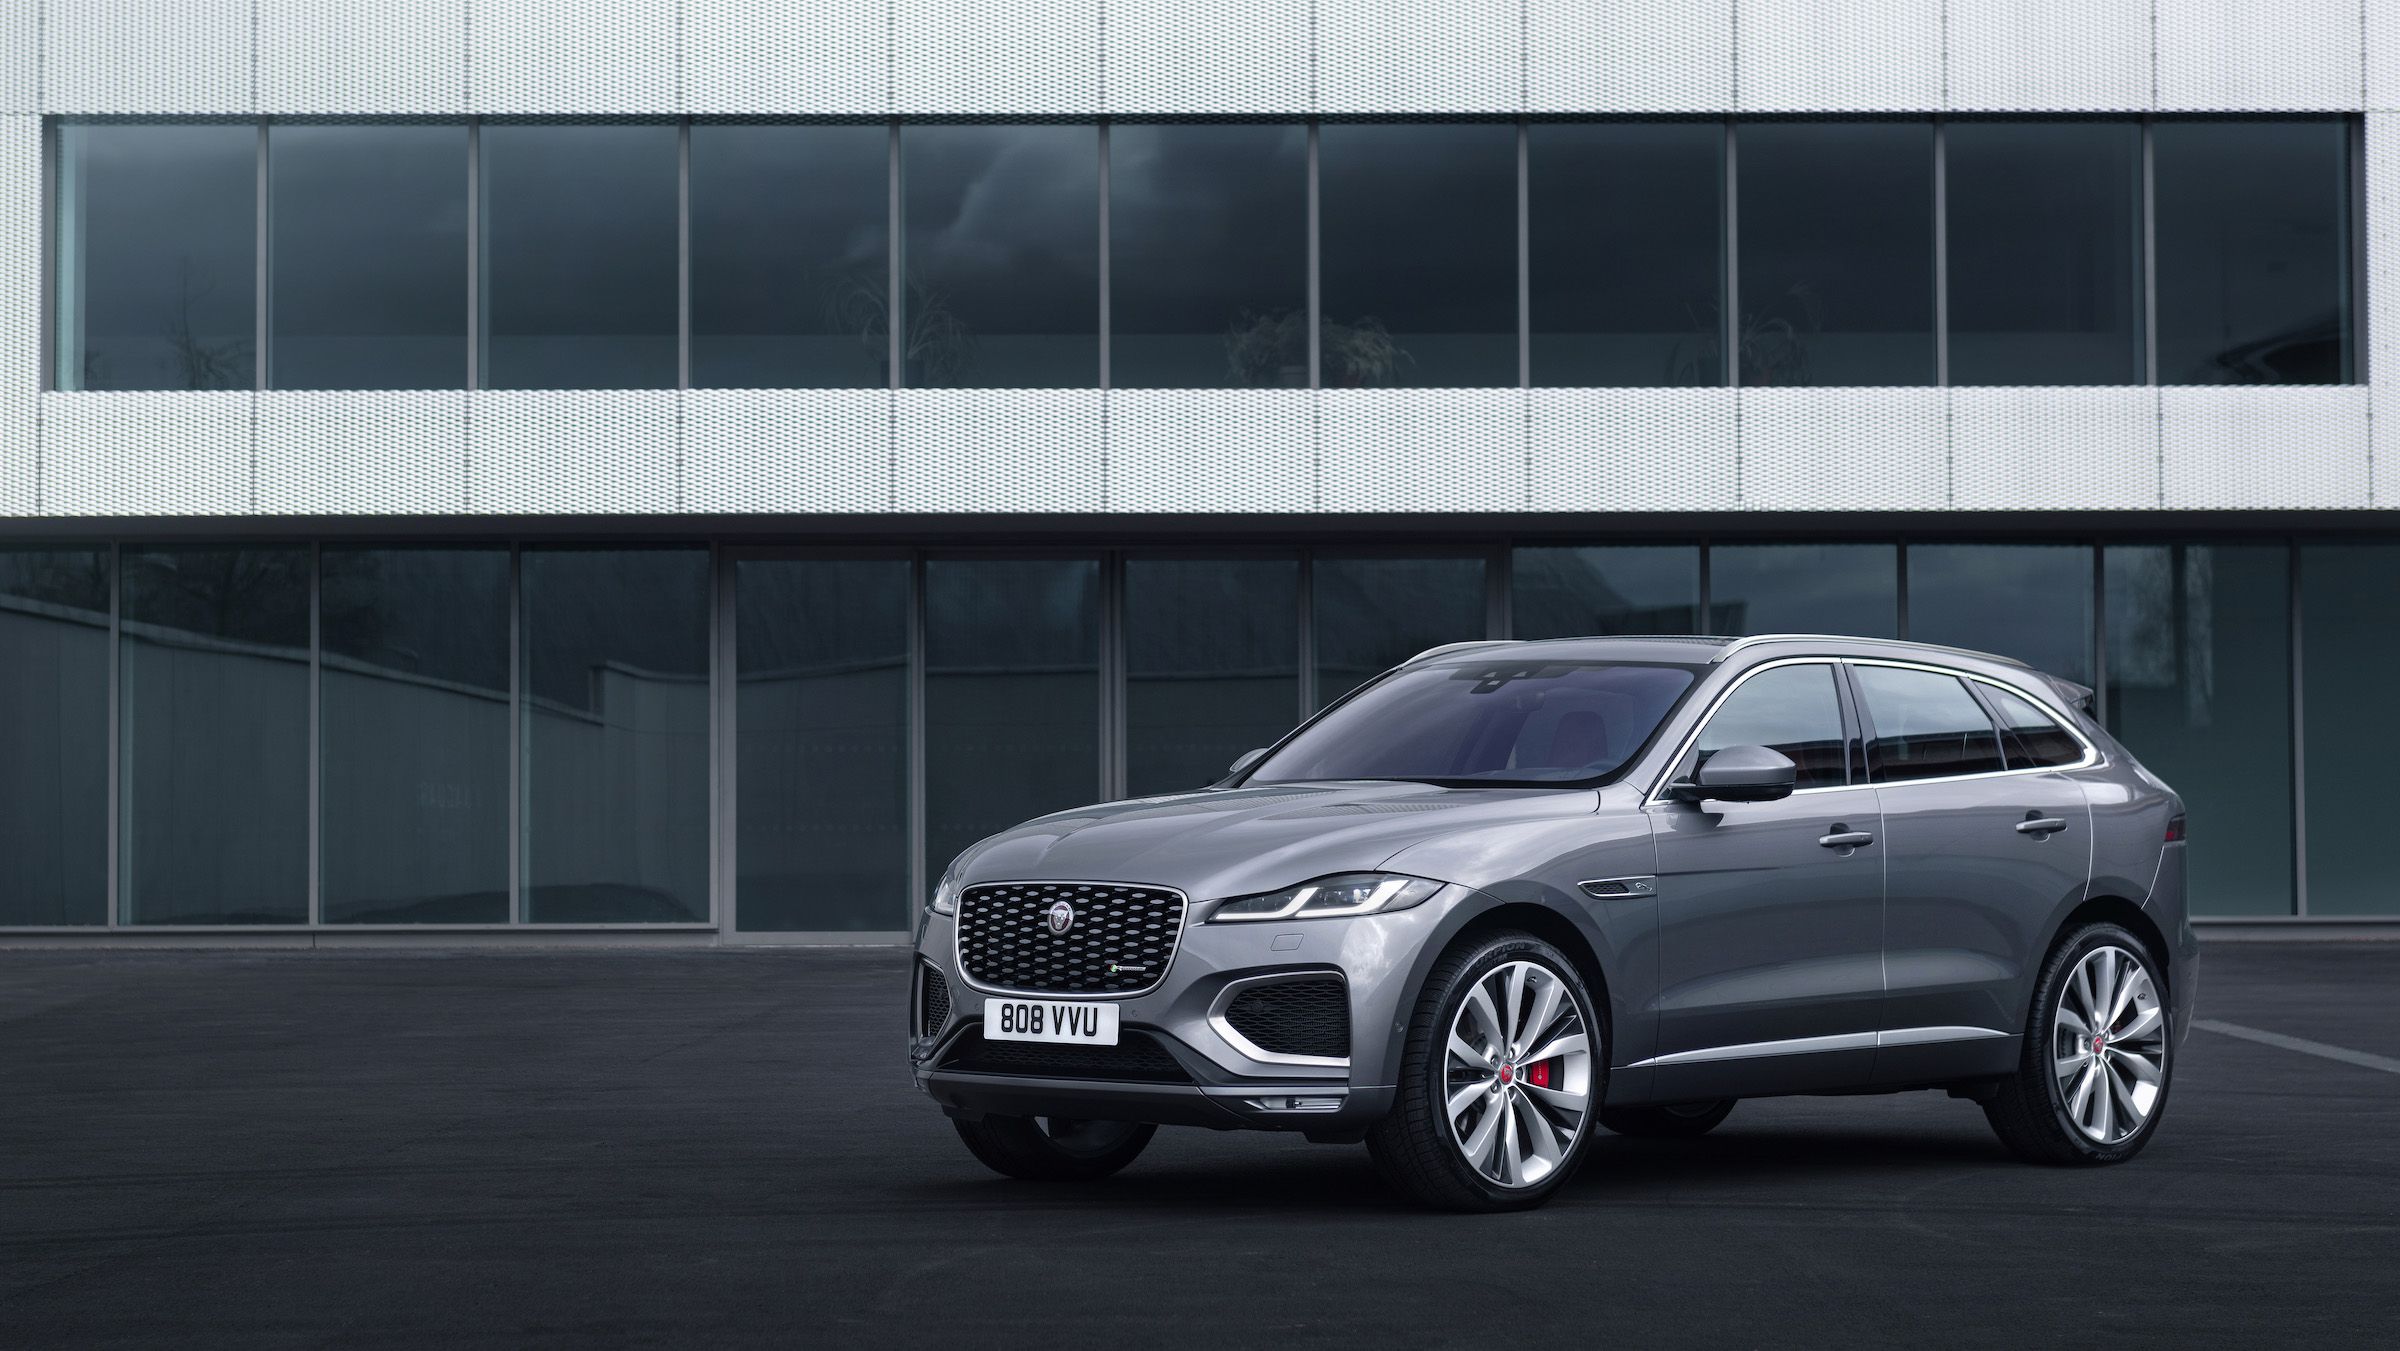 2021 Jaguar F-Pace Review, Pricing, and Specs